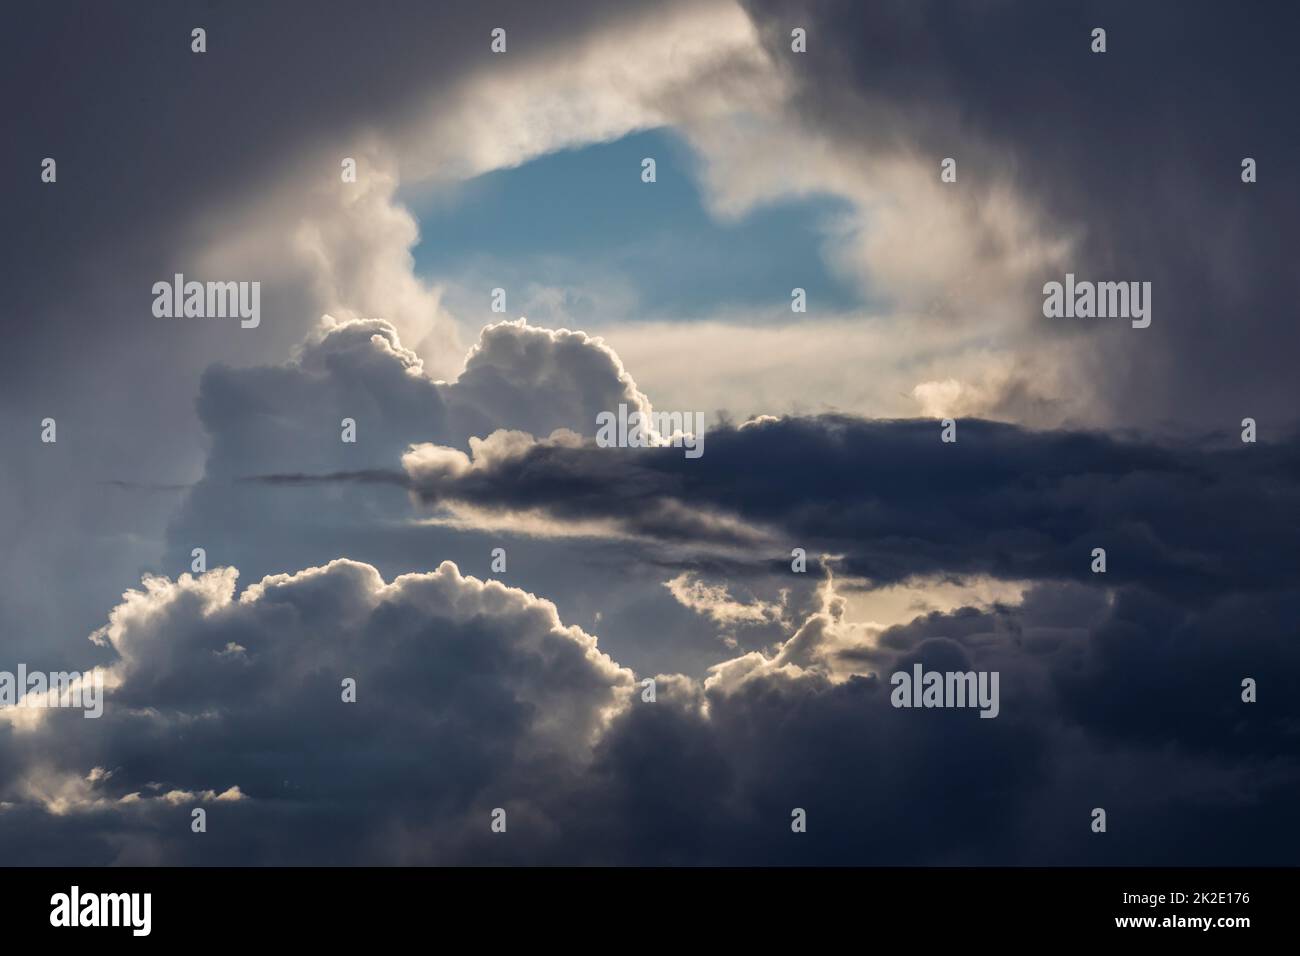 An opening in storm clouds showing blue sky beyond. Stock Photo